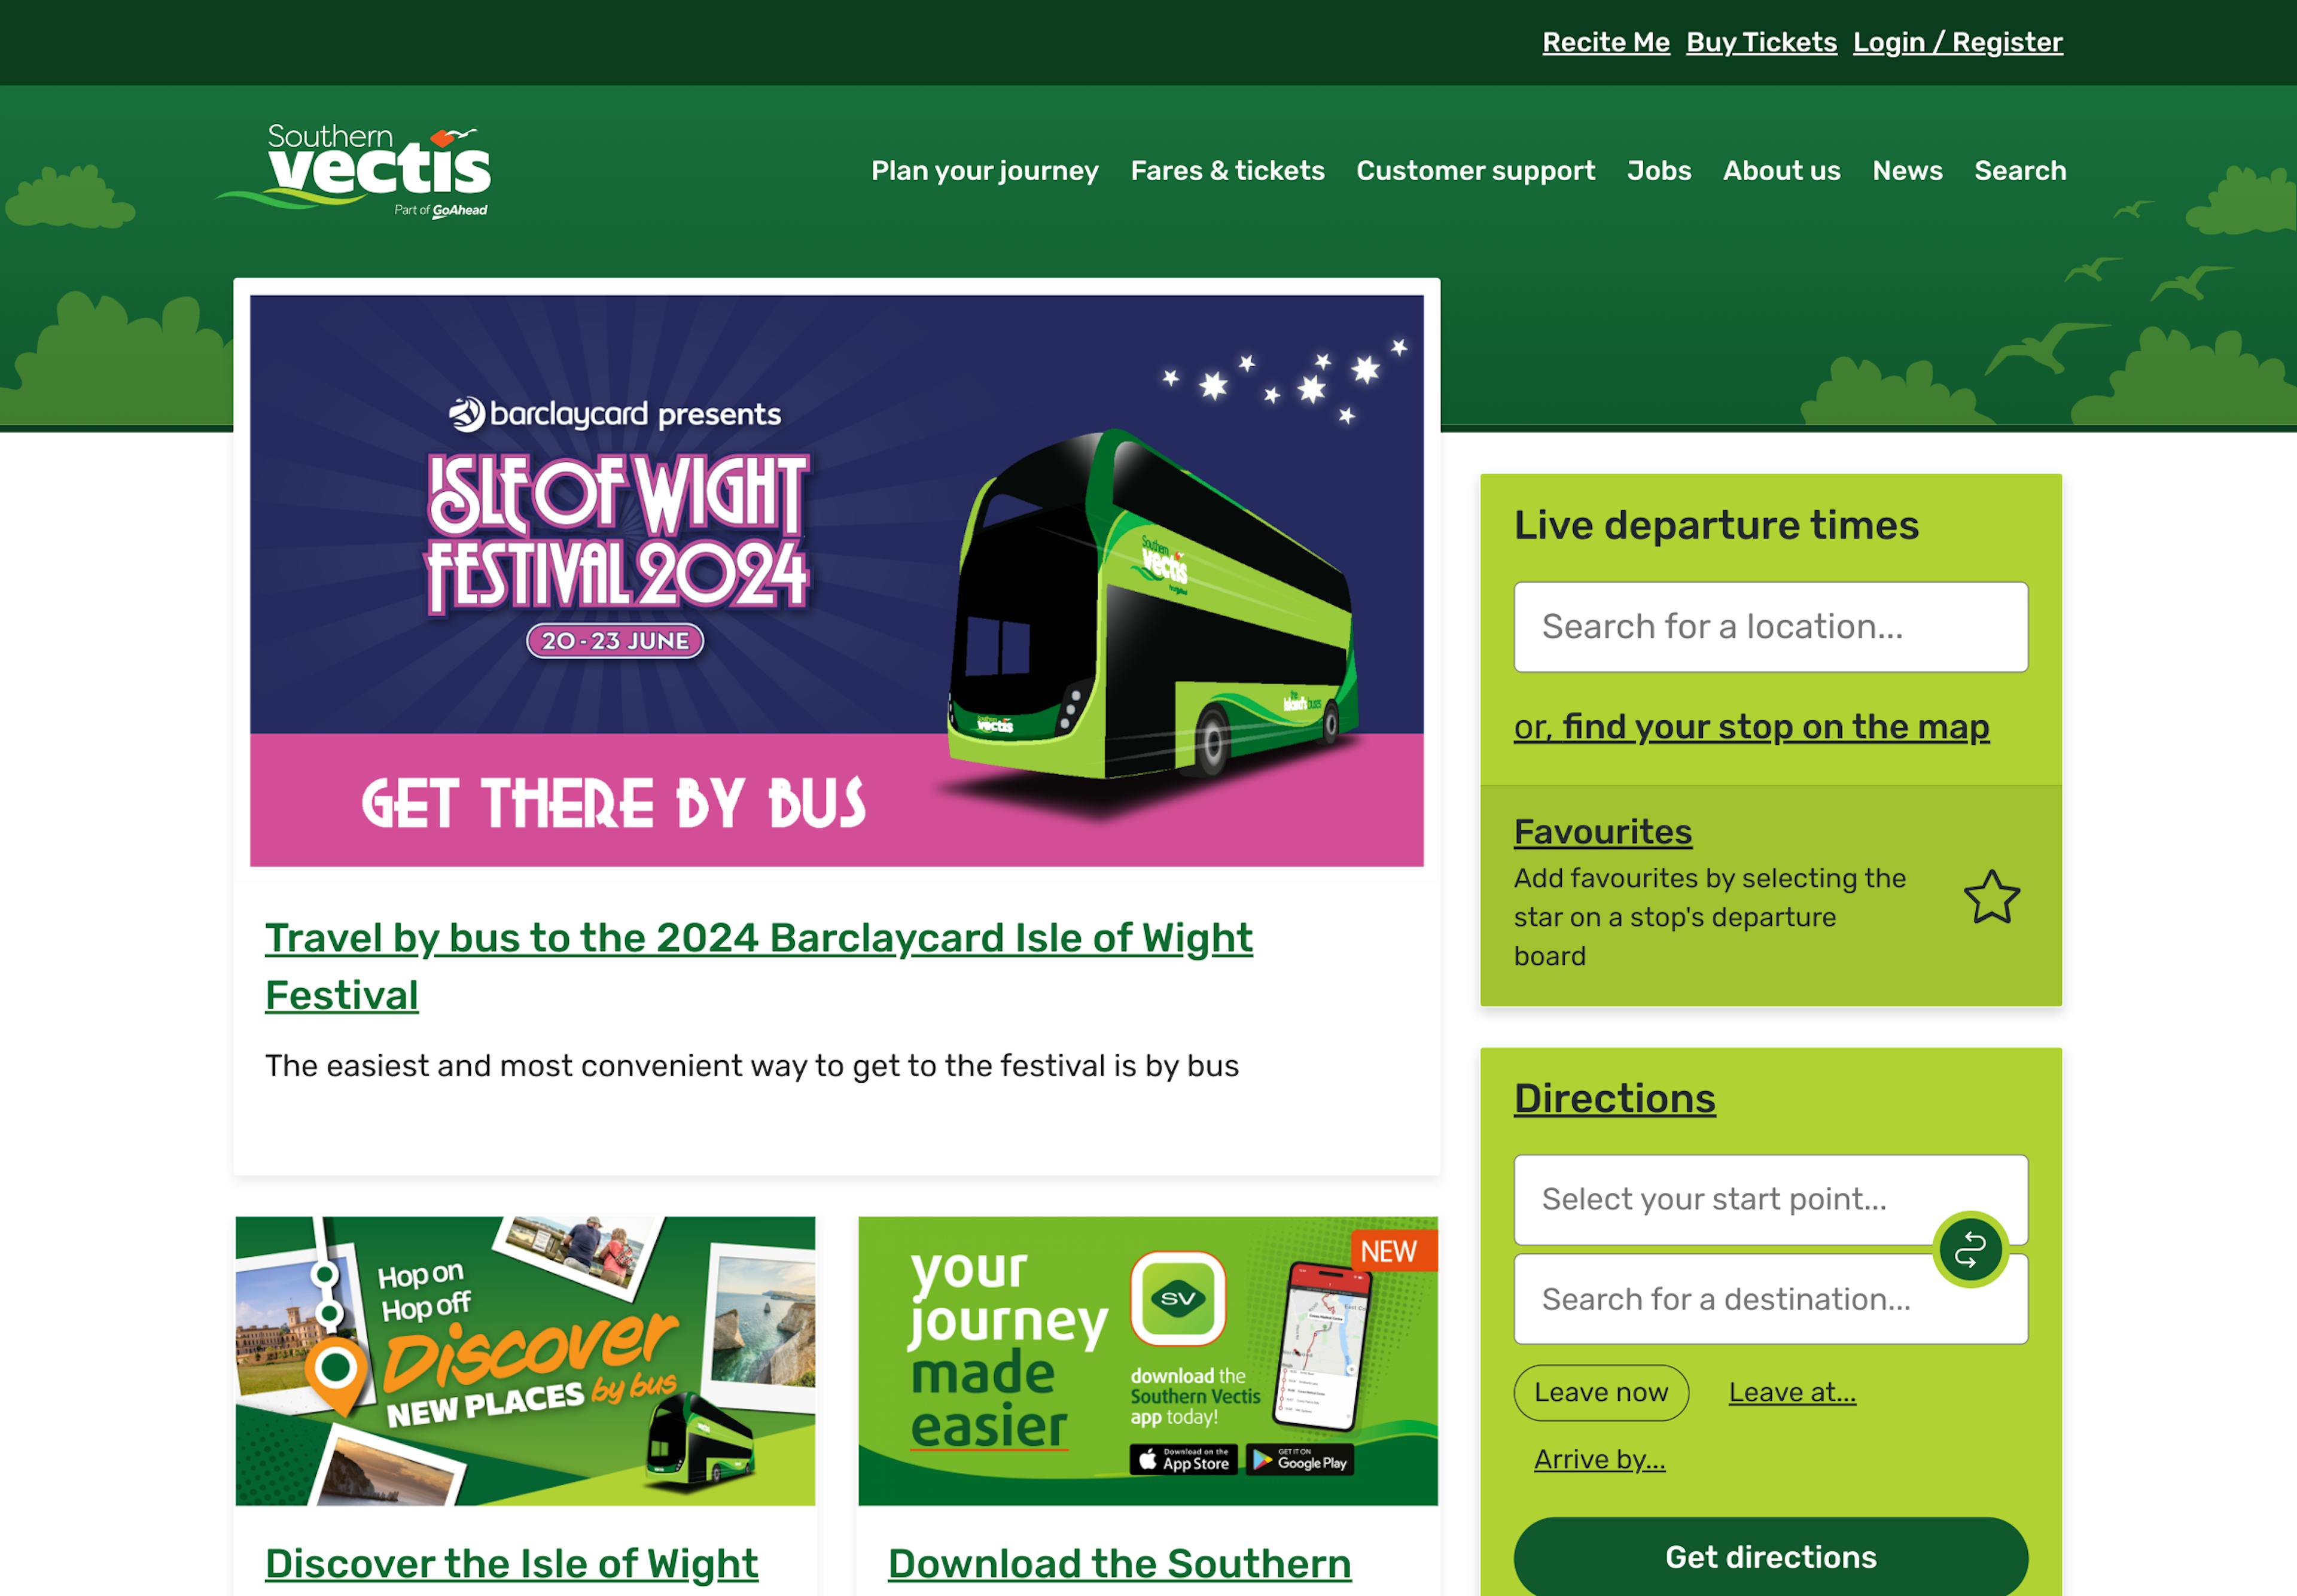 A screenshot of the Southern Vectis homepage